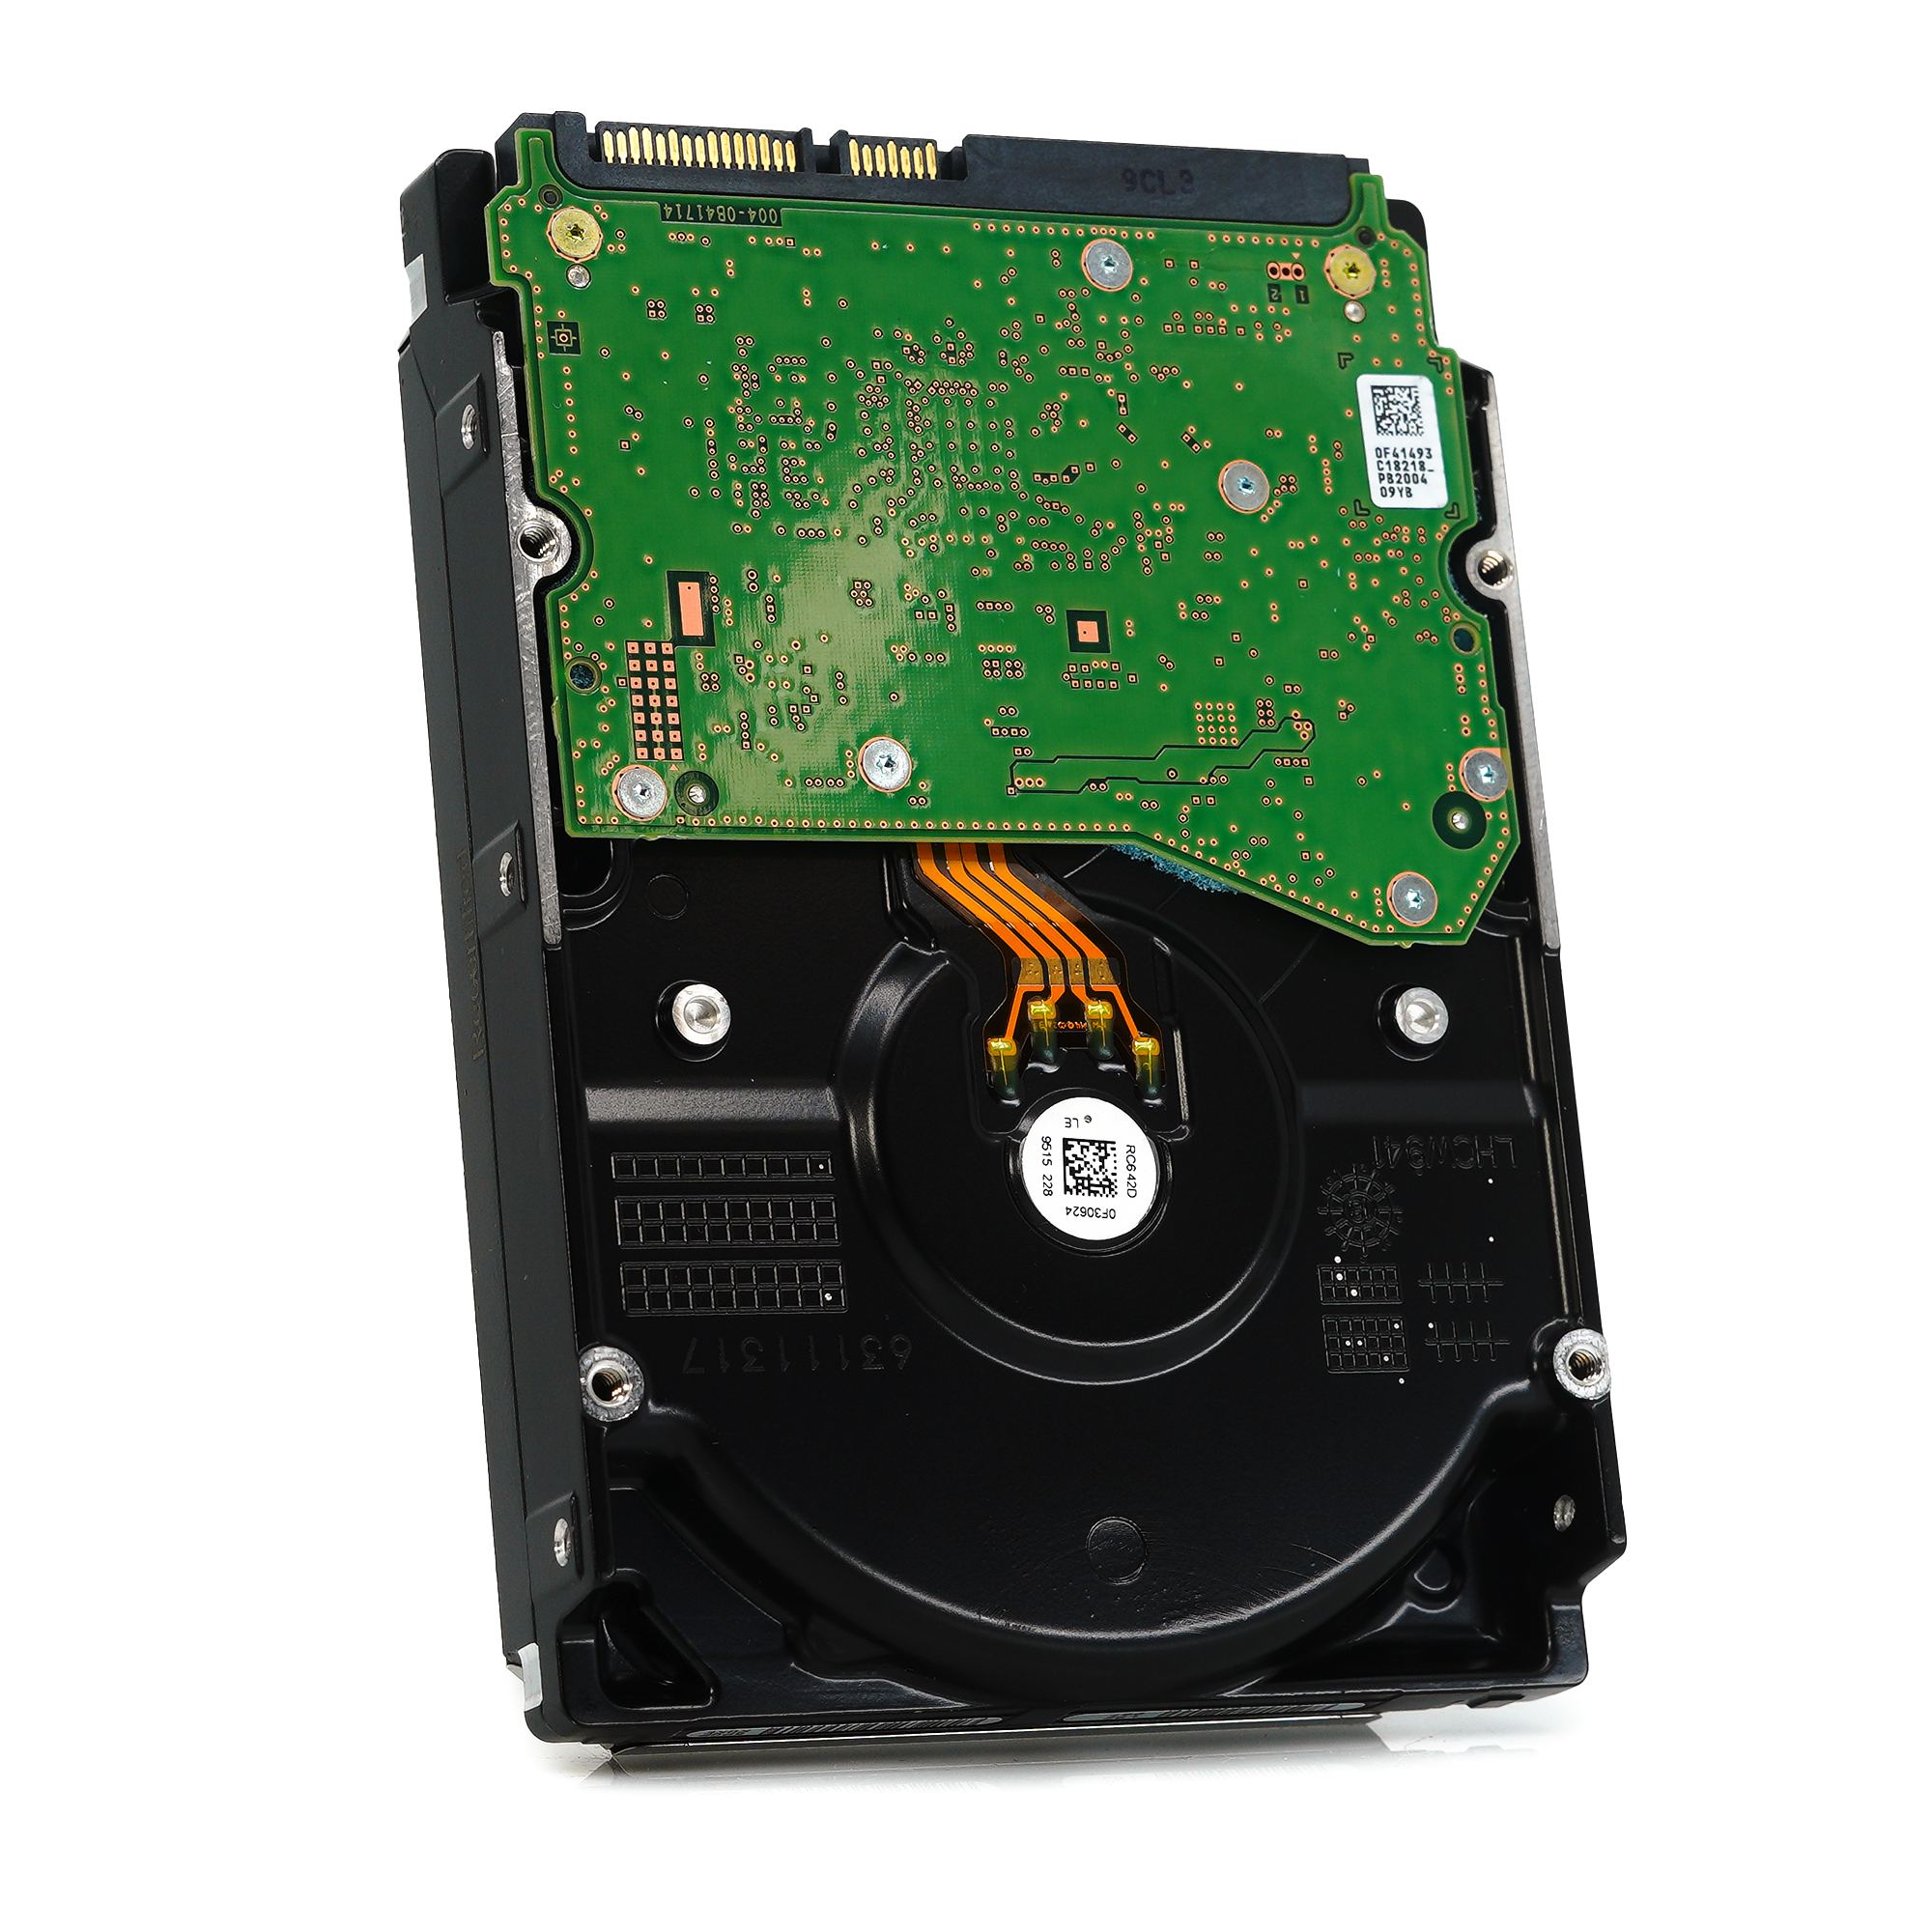 Western Digital Ultrastar DC HC520 HUH721212ALE600 0F29590 12TB 7.2K RPM SATA 6Gb/s 512e 256MB 3.5" ISE Power Disable Pin Manufacturer Recertified HDD